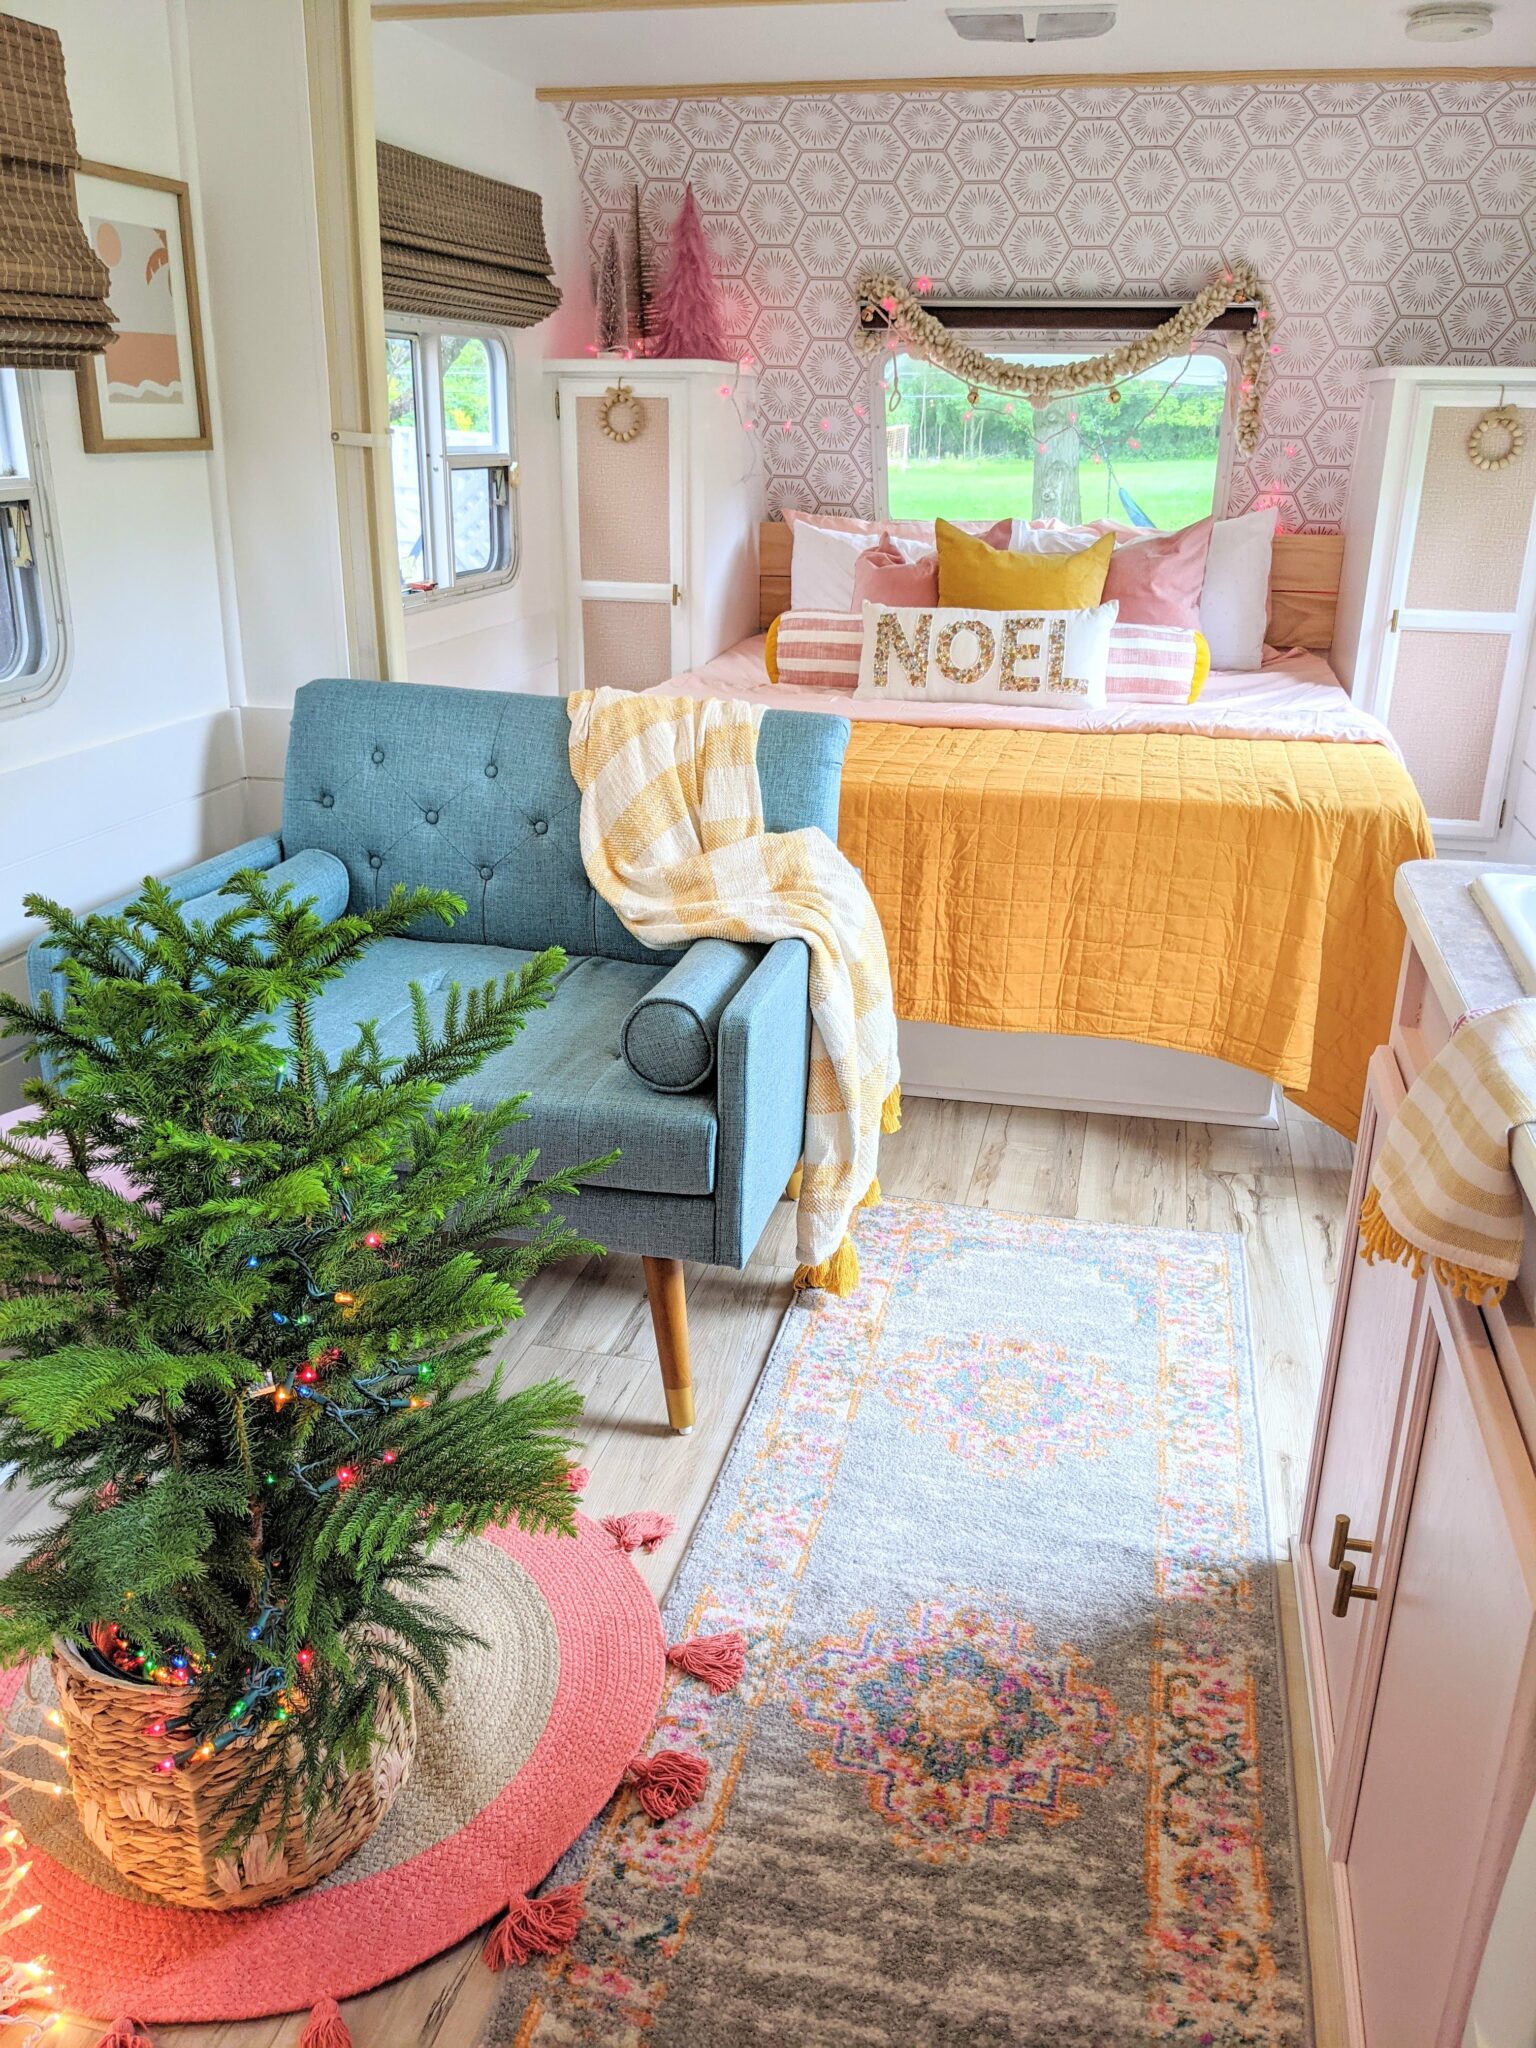 Colorful and Fun Christmas Decorations in the Renovated Camper All Things with Purpose Sarah Lemp 12